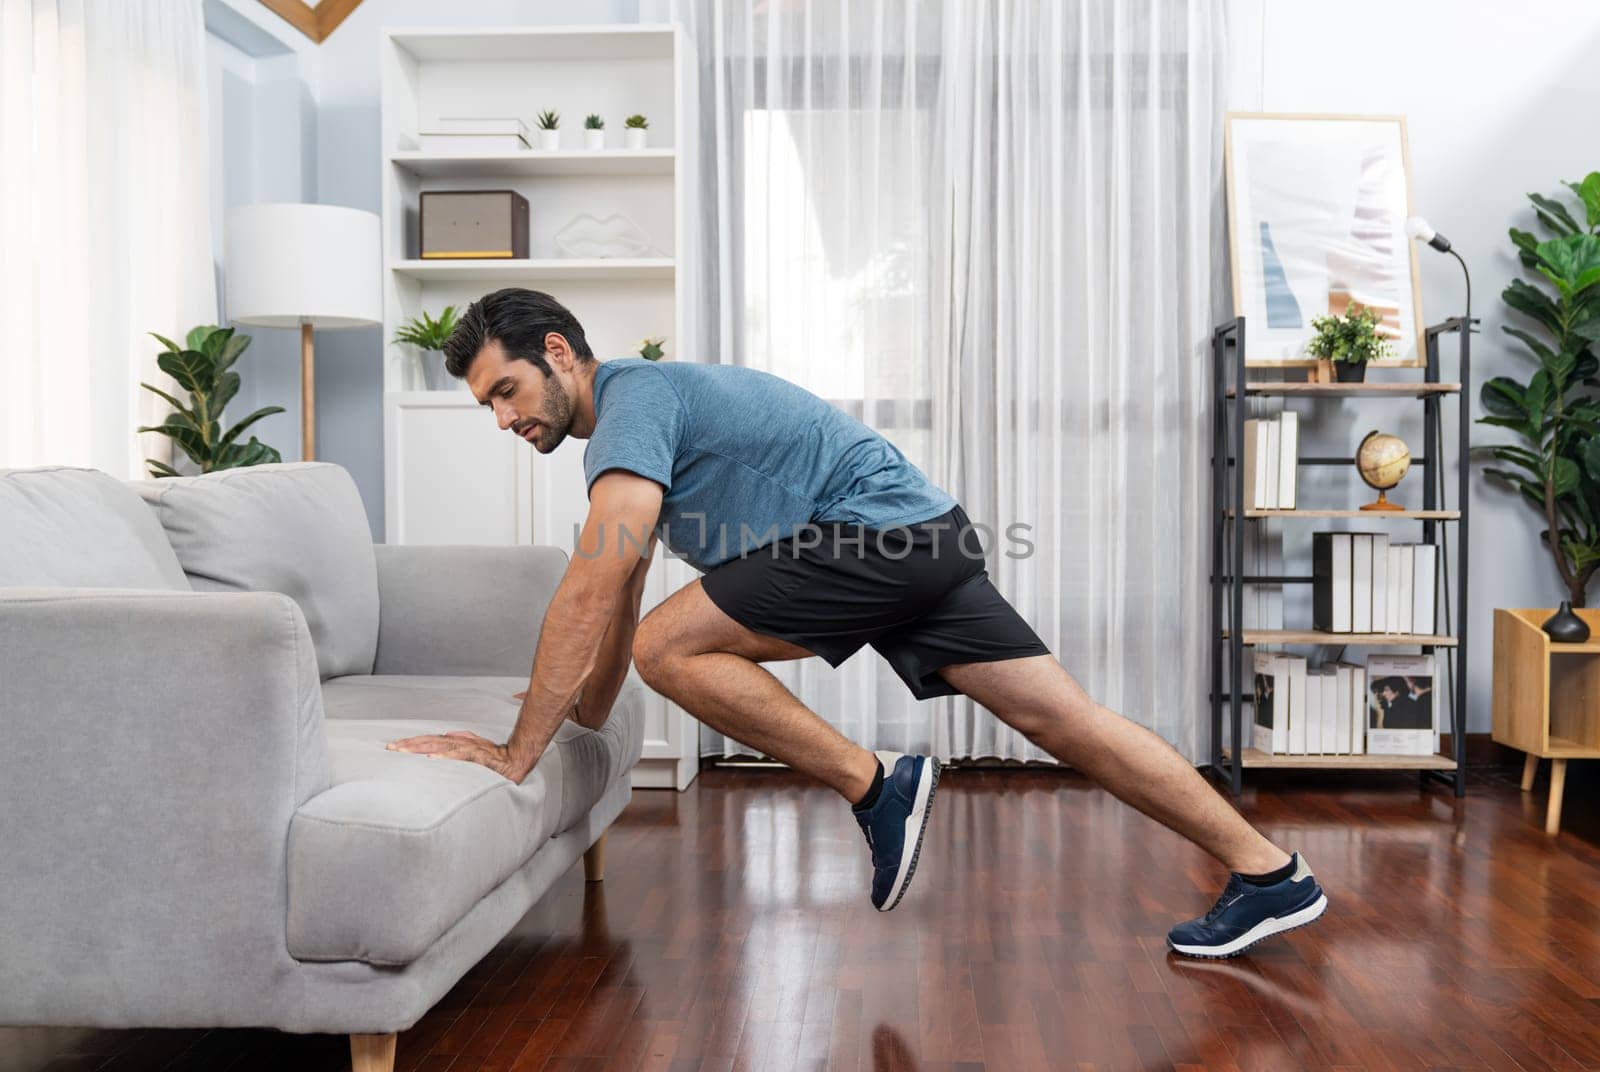 Athletic body and active sporty man using furniture for gaiety home exercise. by biancoblue